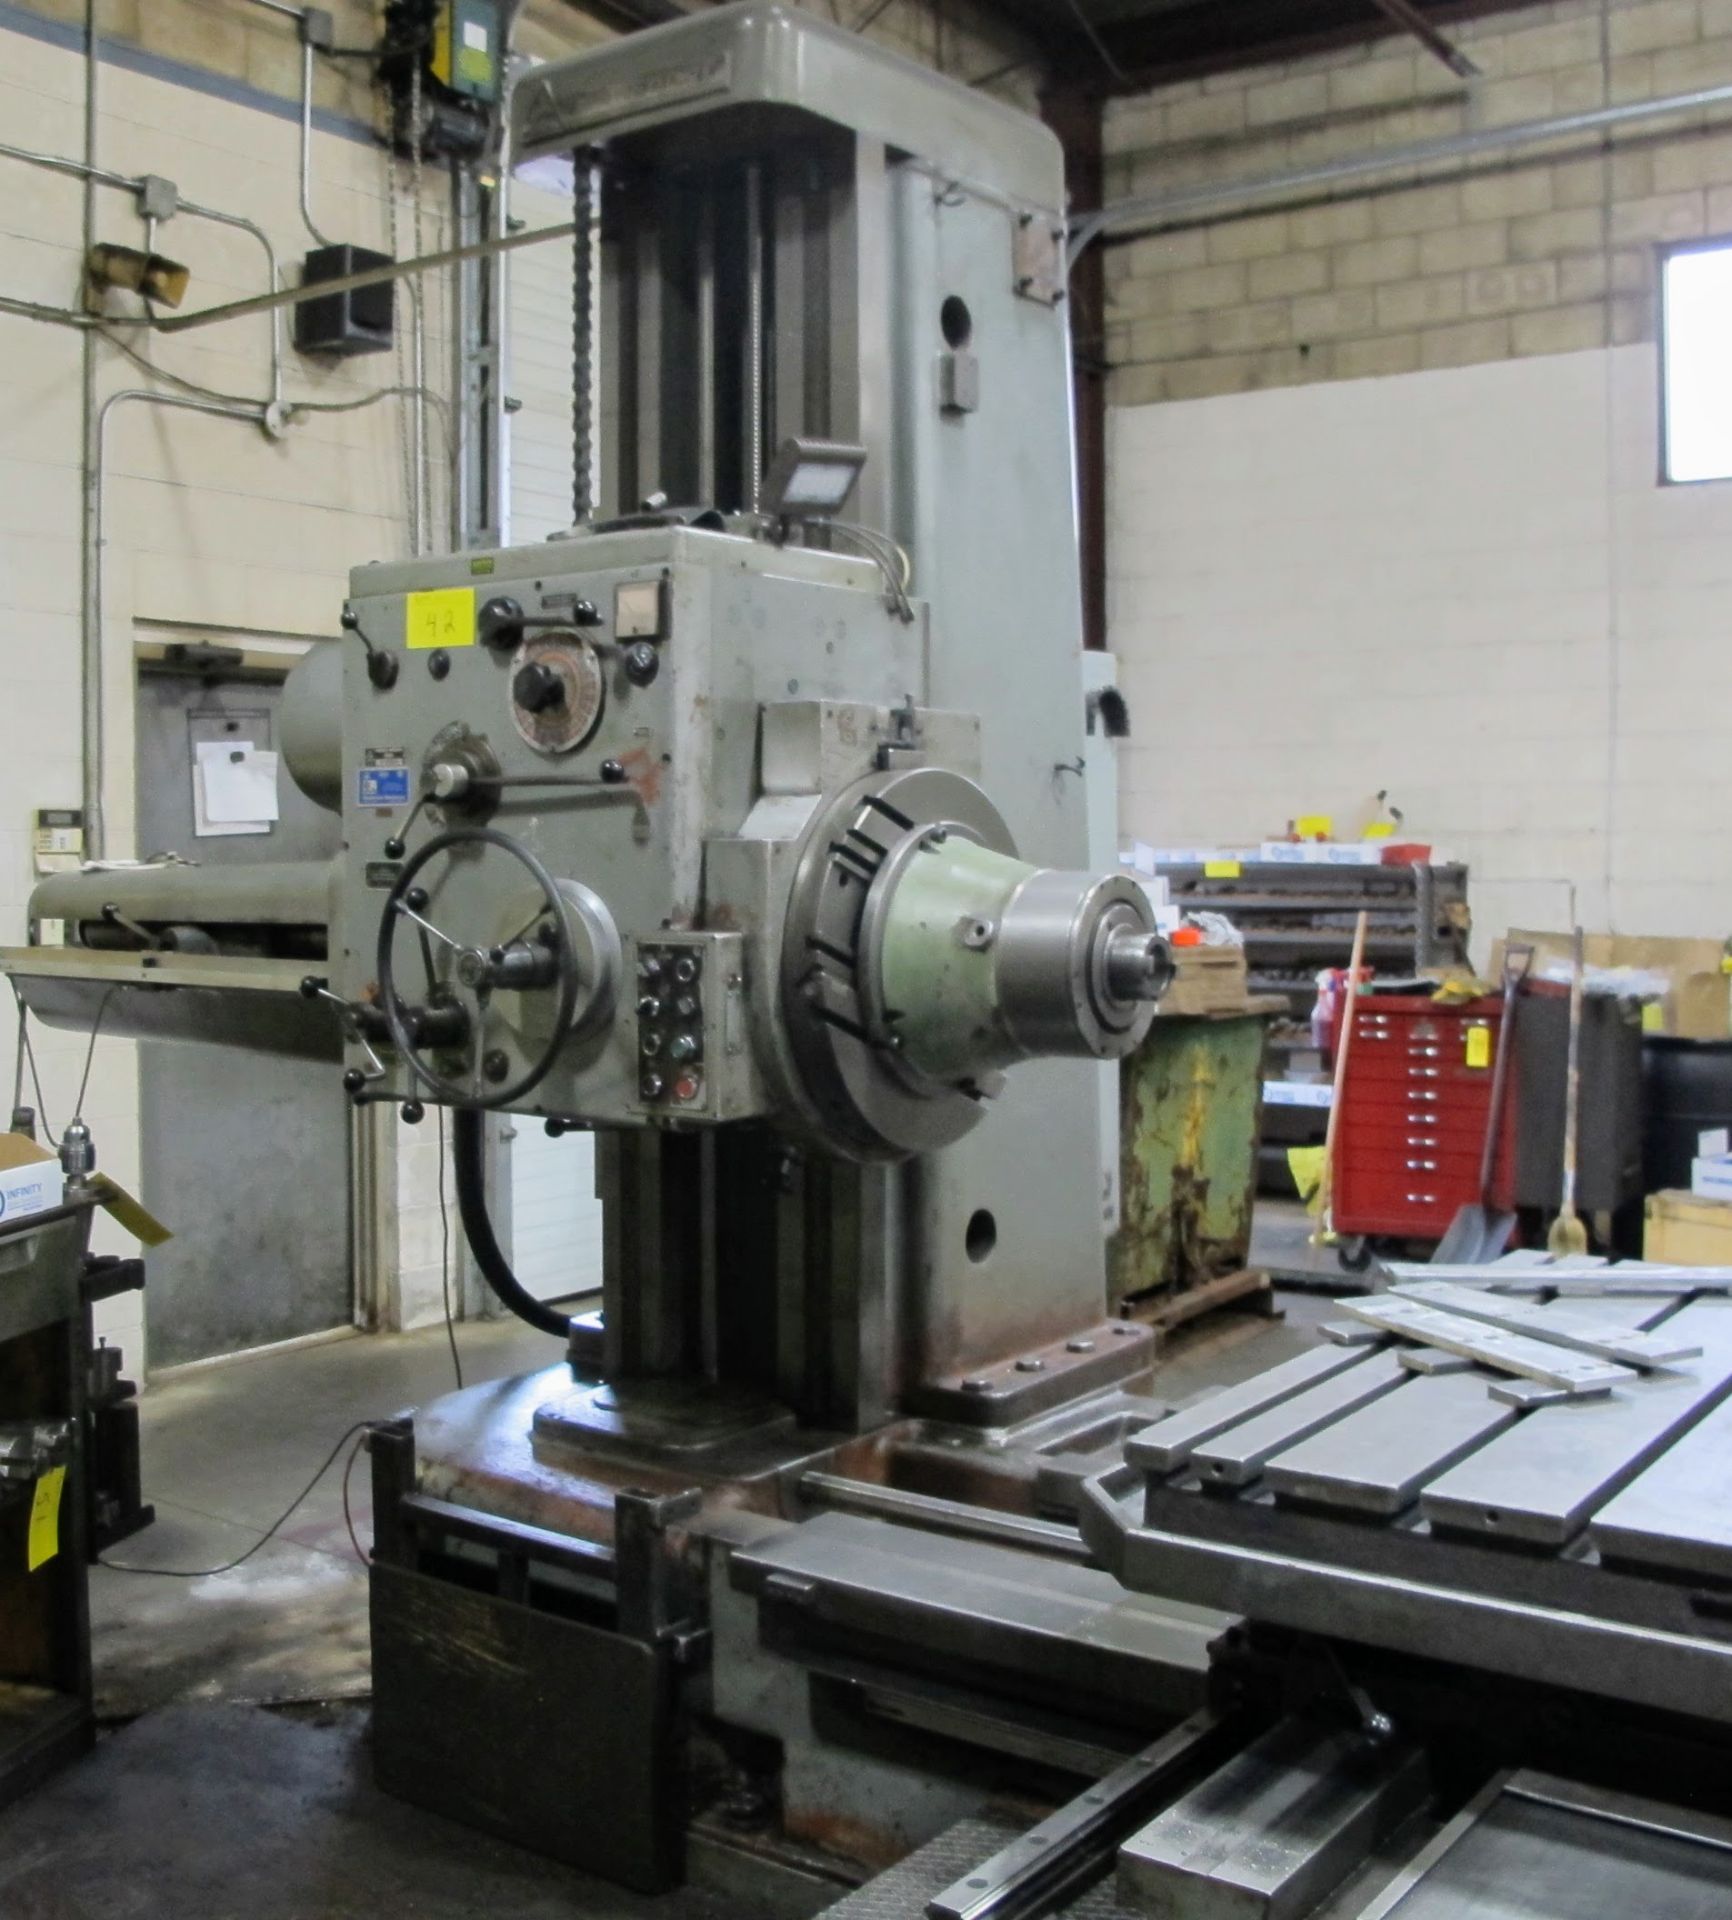 TOS W100 HORIZONTAL BORING MILL, ACU-RITE 4-AXIS DRO, 4" SPINDLE, 14 TO 1,120 RPM, 49" X 49" POWERED - Image 10 of 12